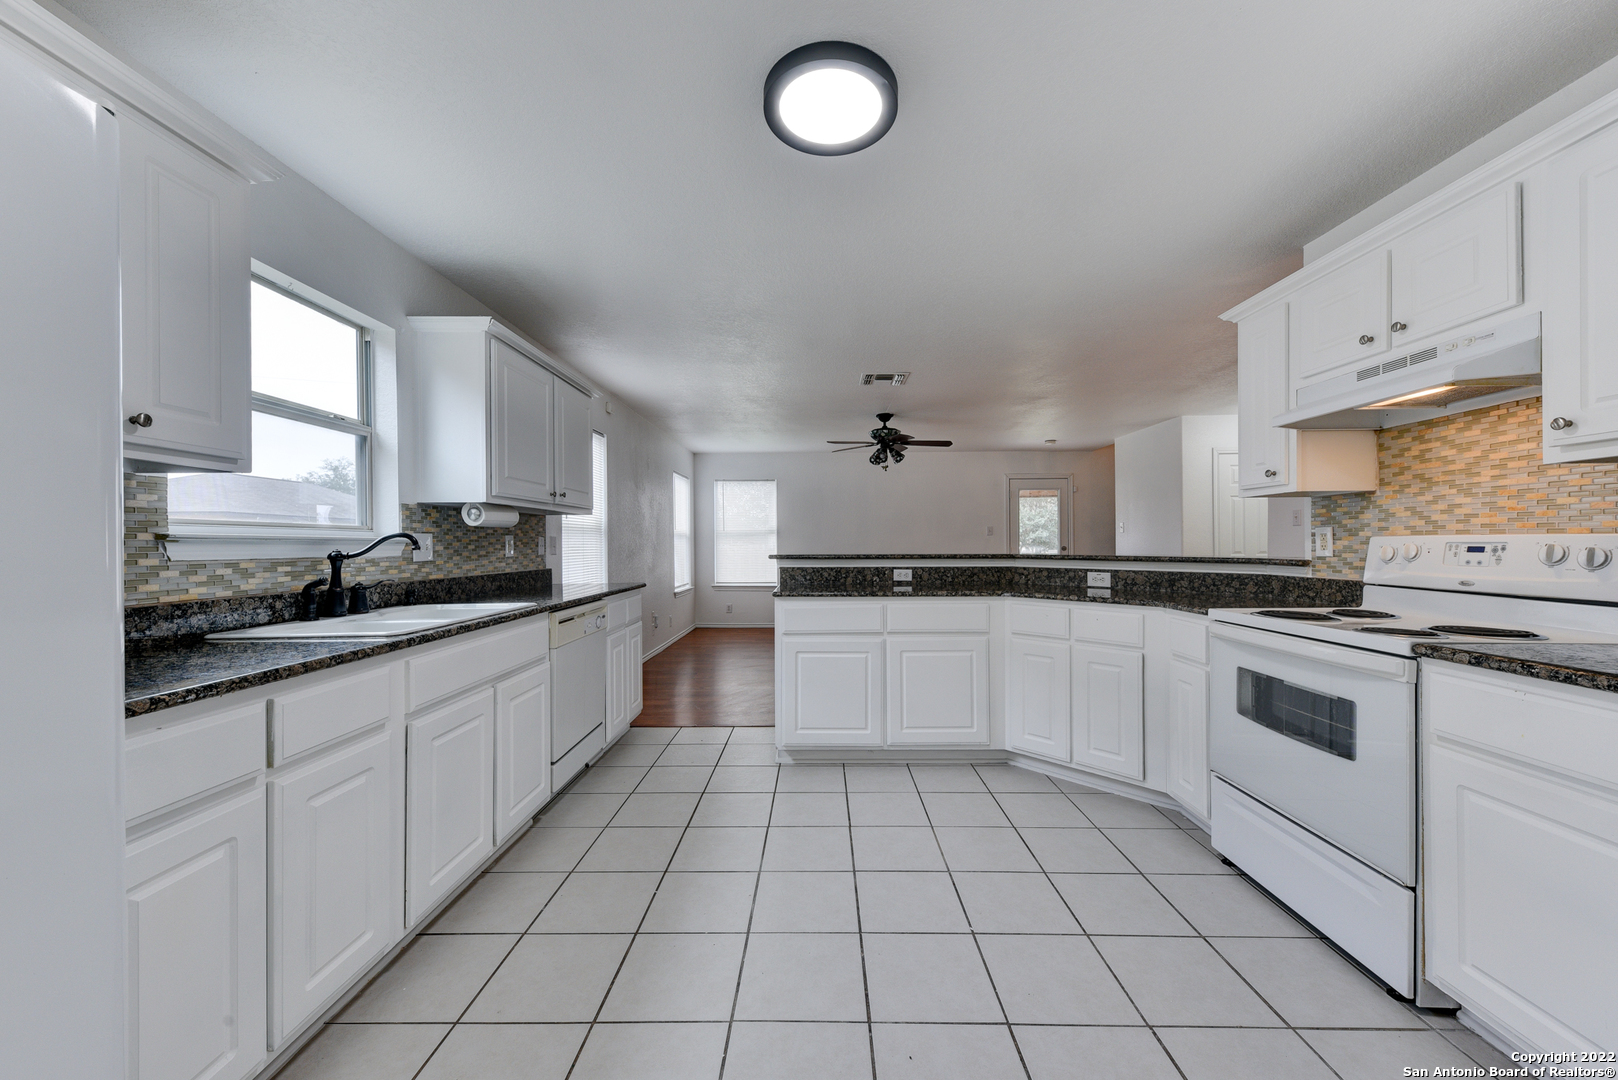 a large kitchen with white cabinets and appliances